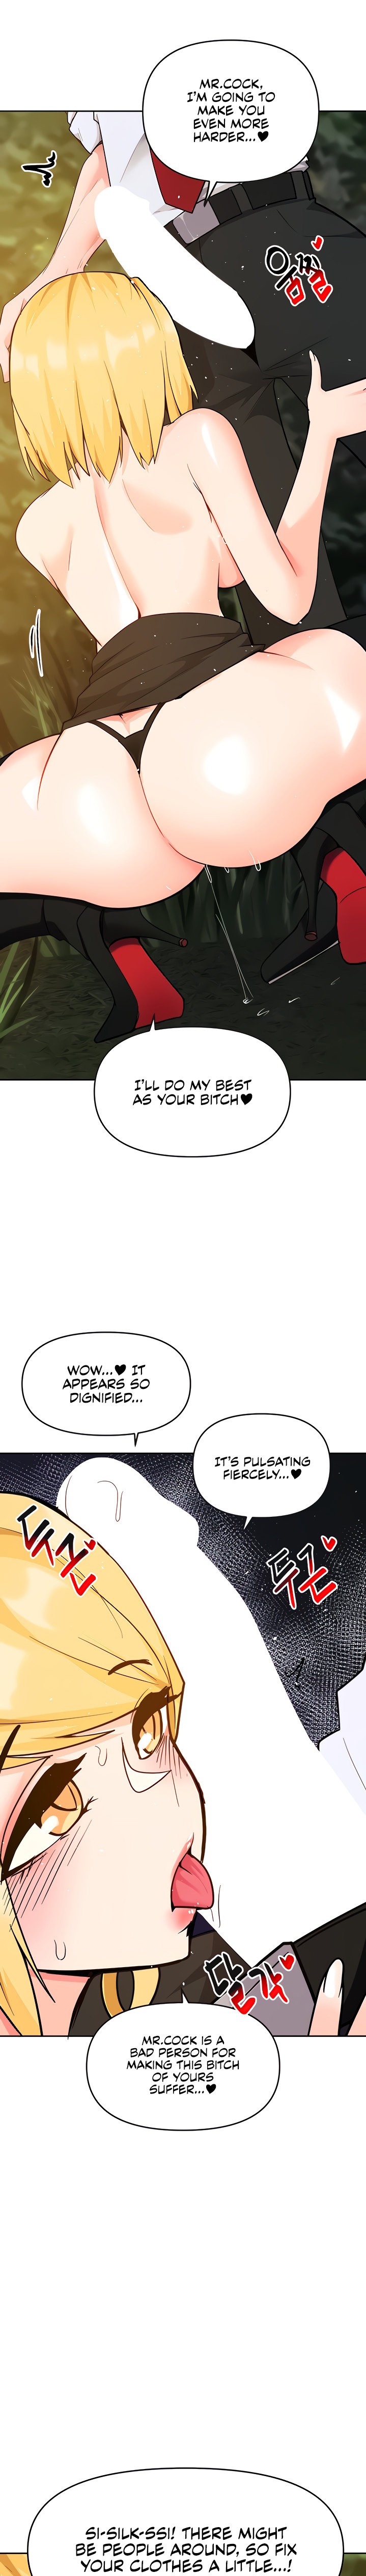 The Hypnosis App was Fake - Chapter 42 Page 3